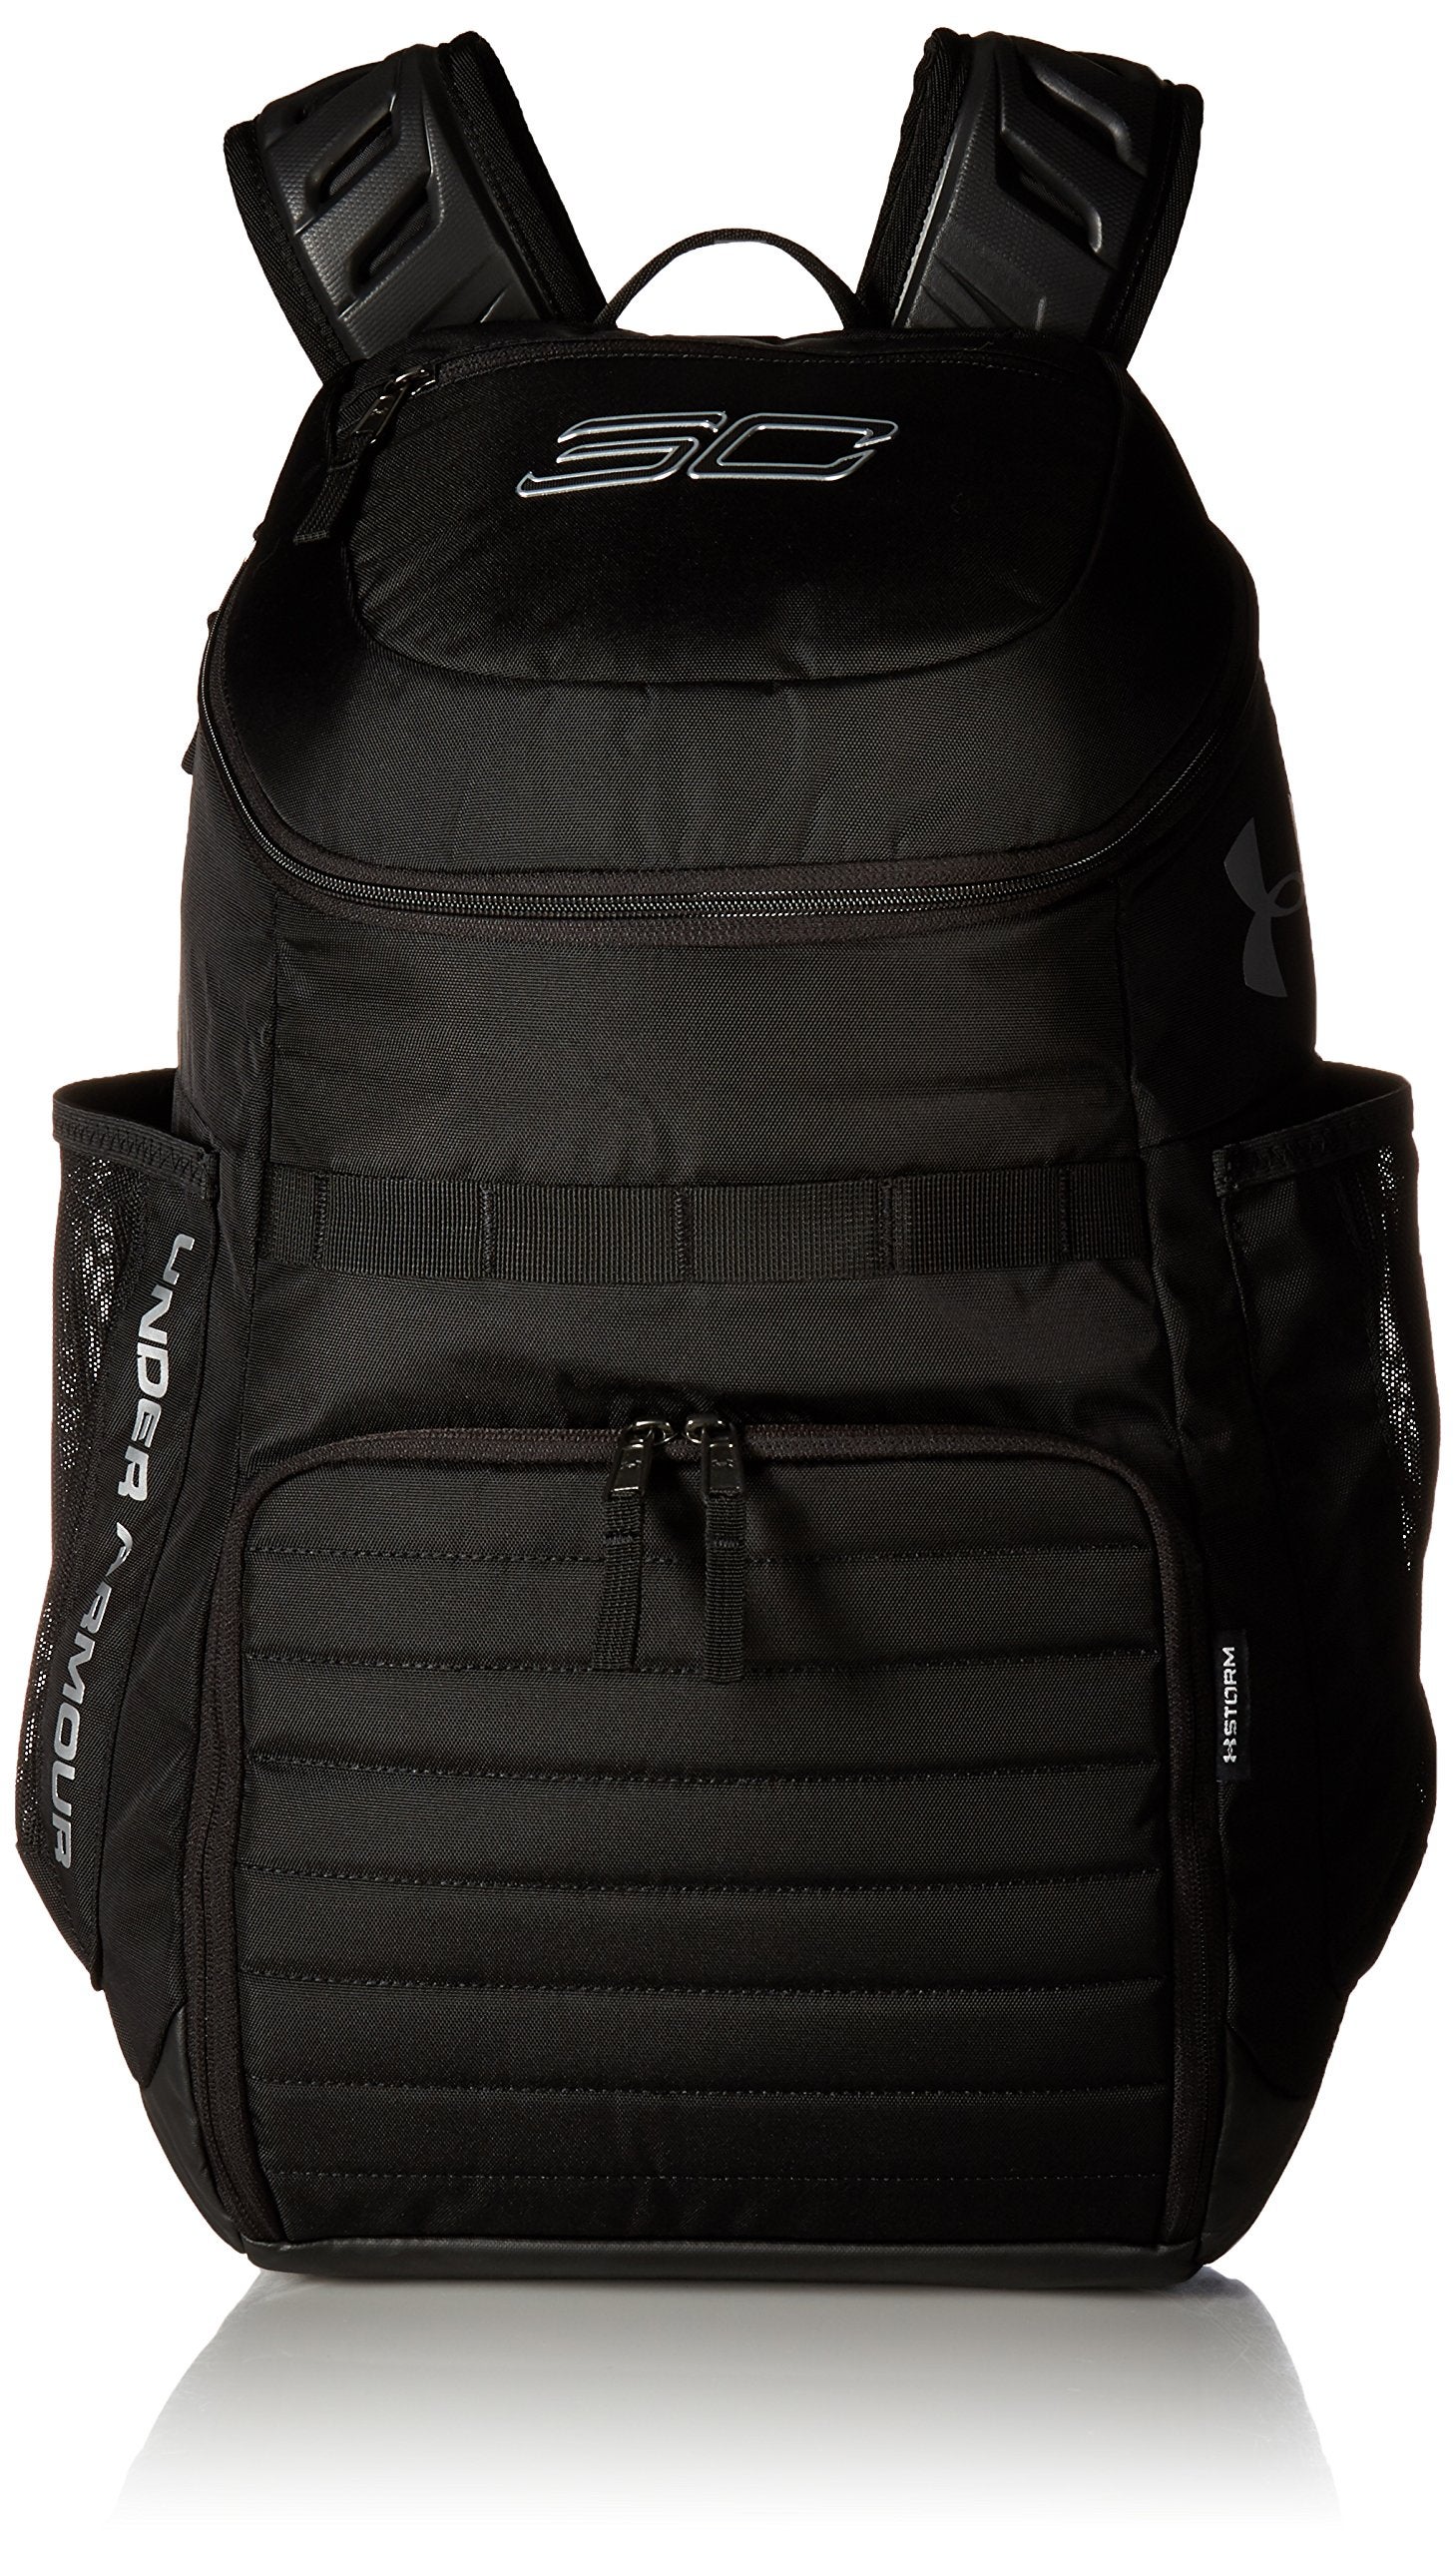 Under Armour SC30 Undeniable Backpack